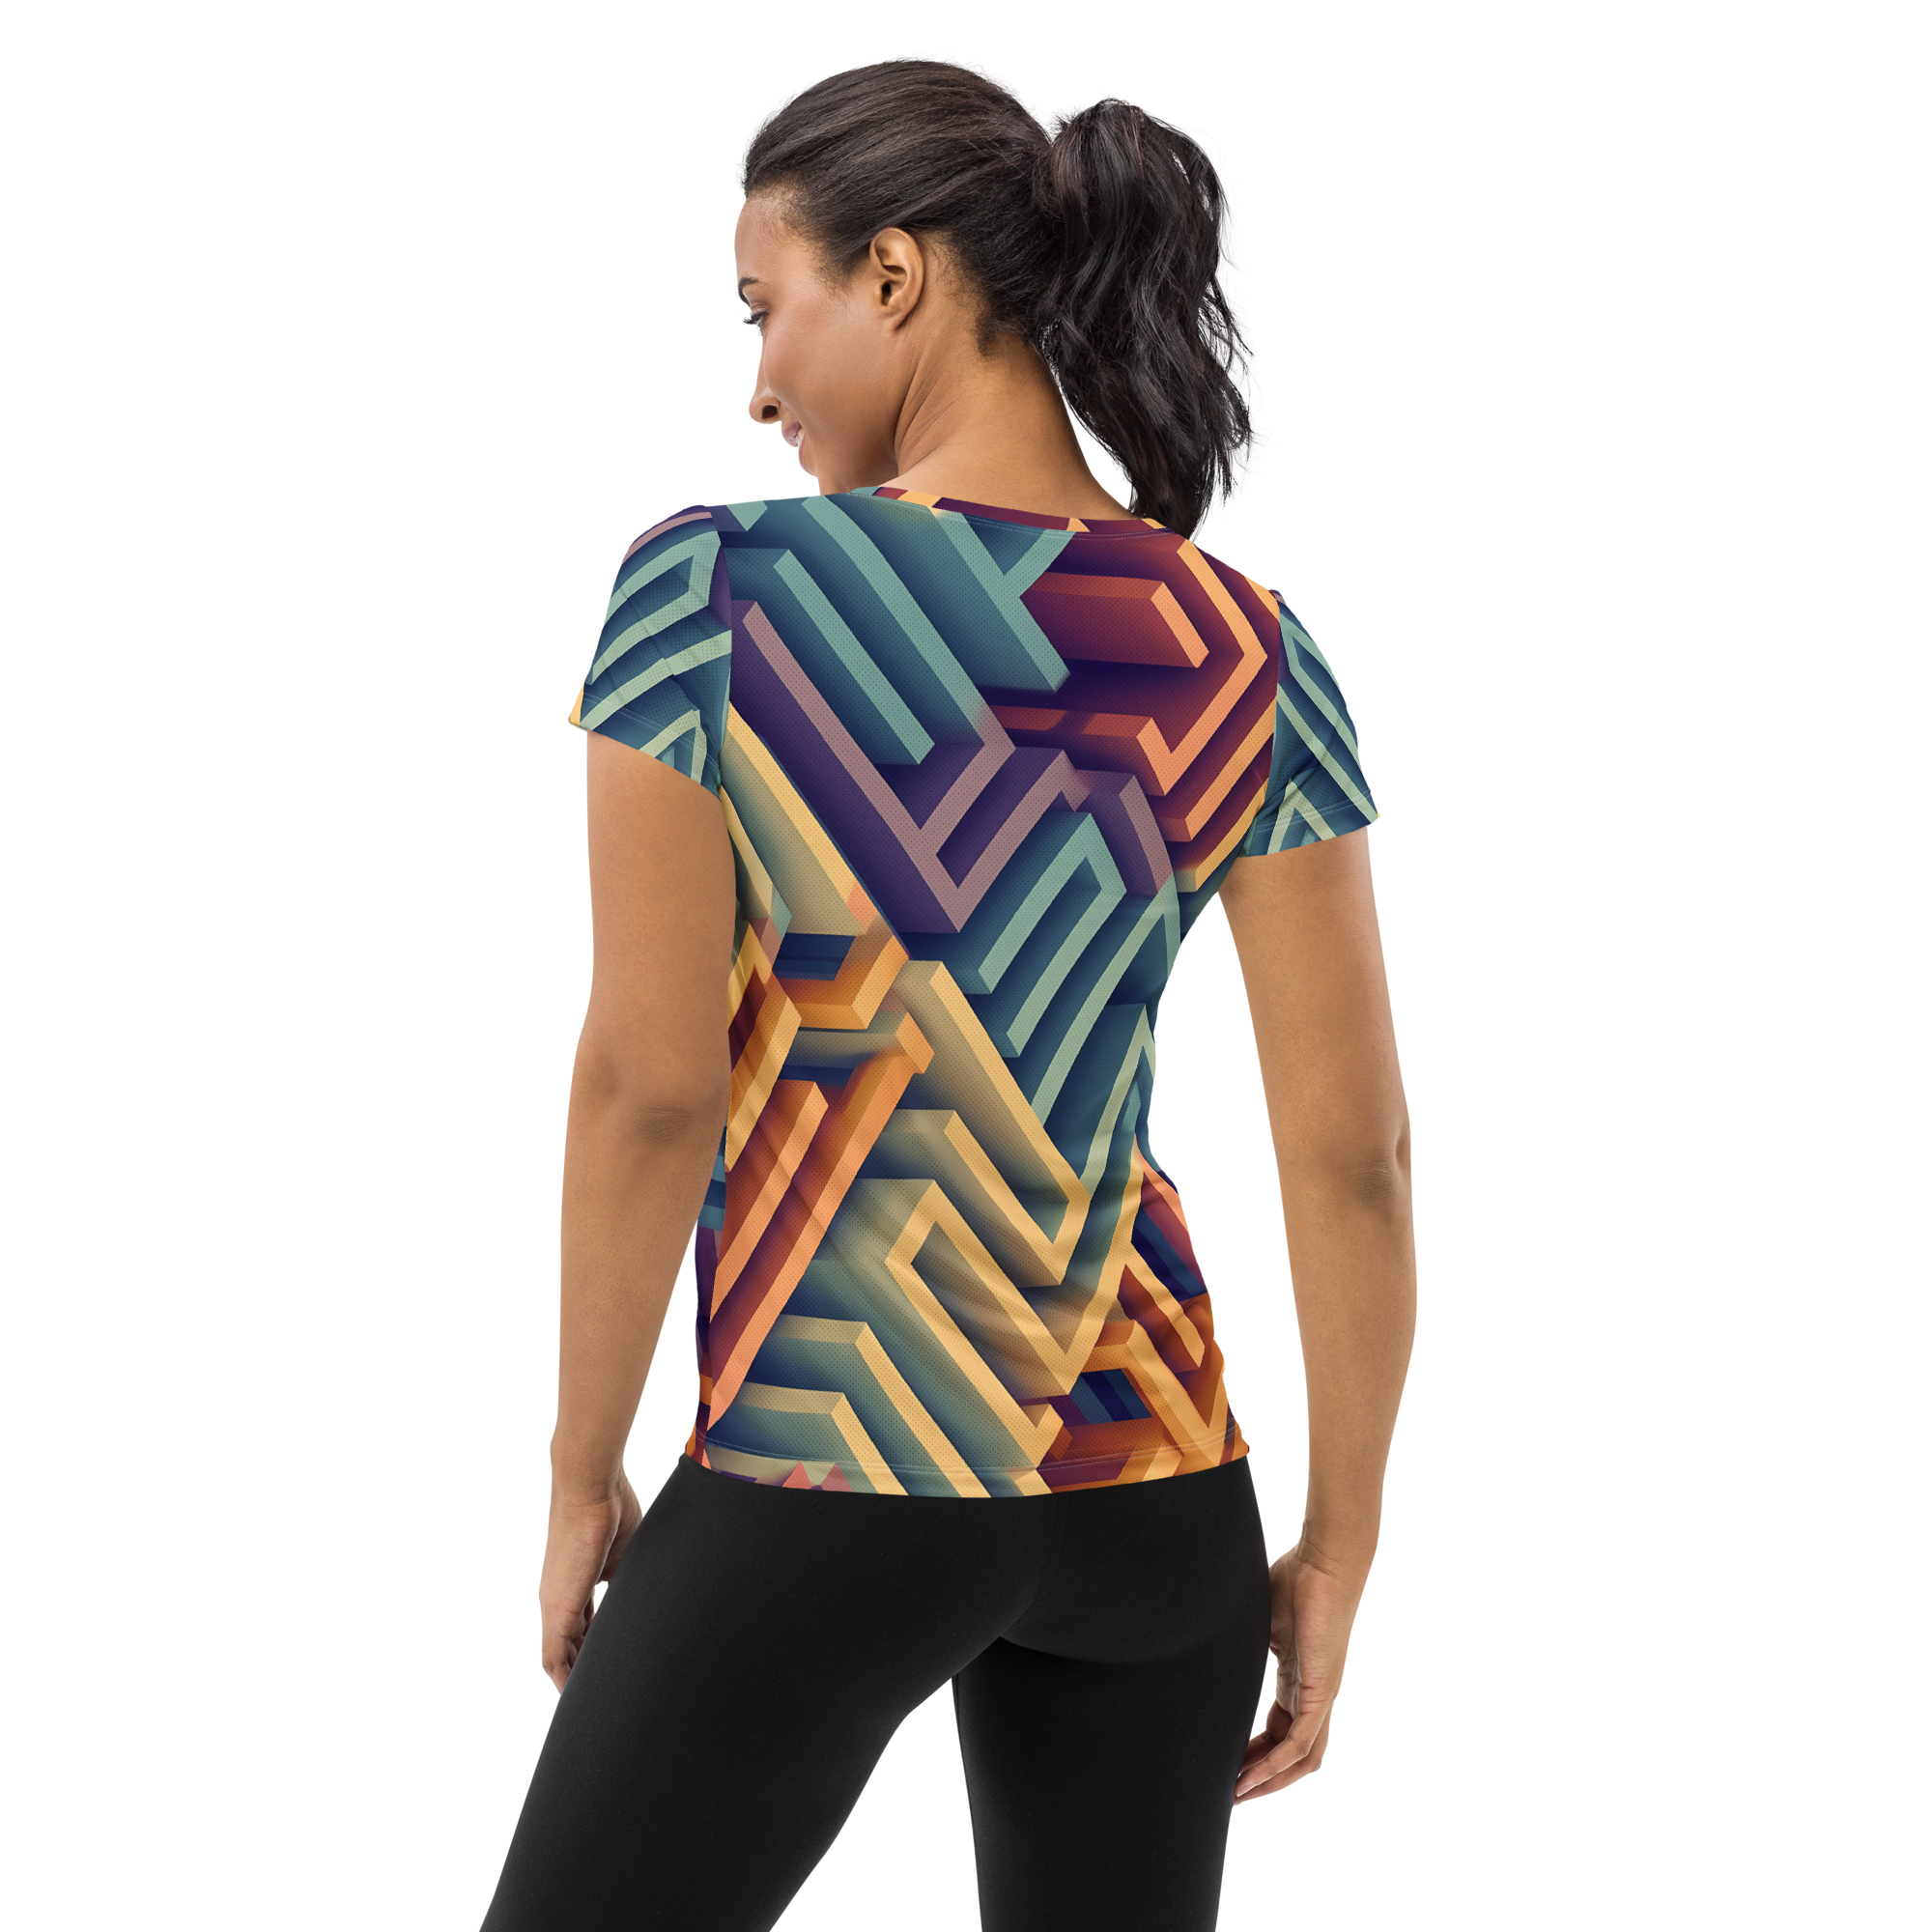 3D Maze Illusion | 3D Patterns | All-Over Print Women's Athletic T-Shirt - #3